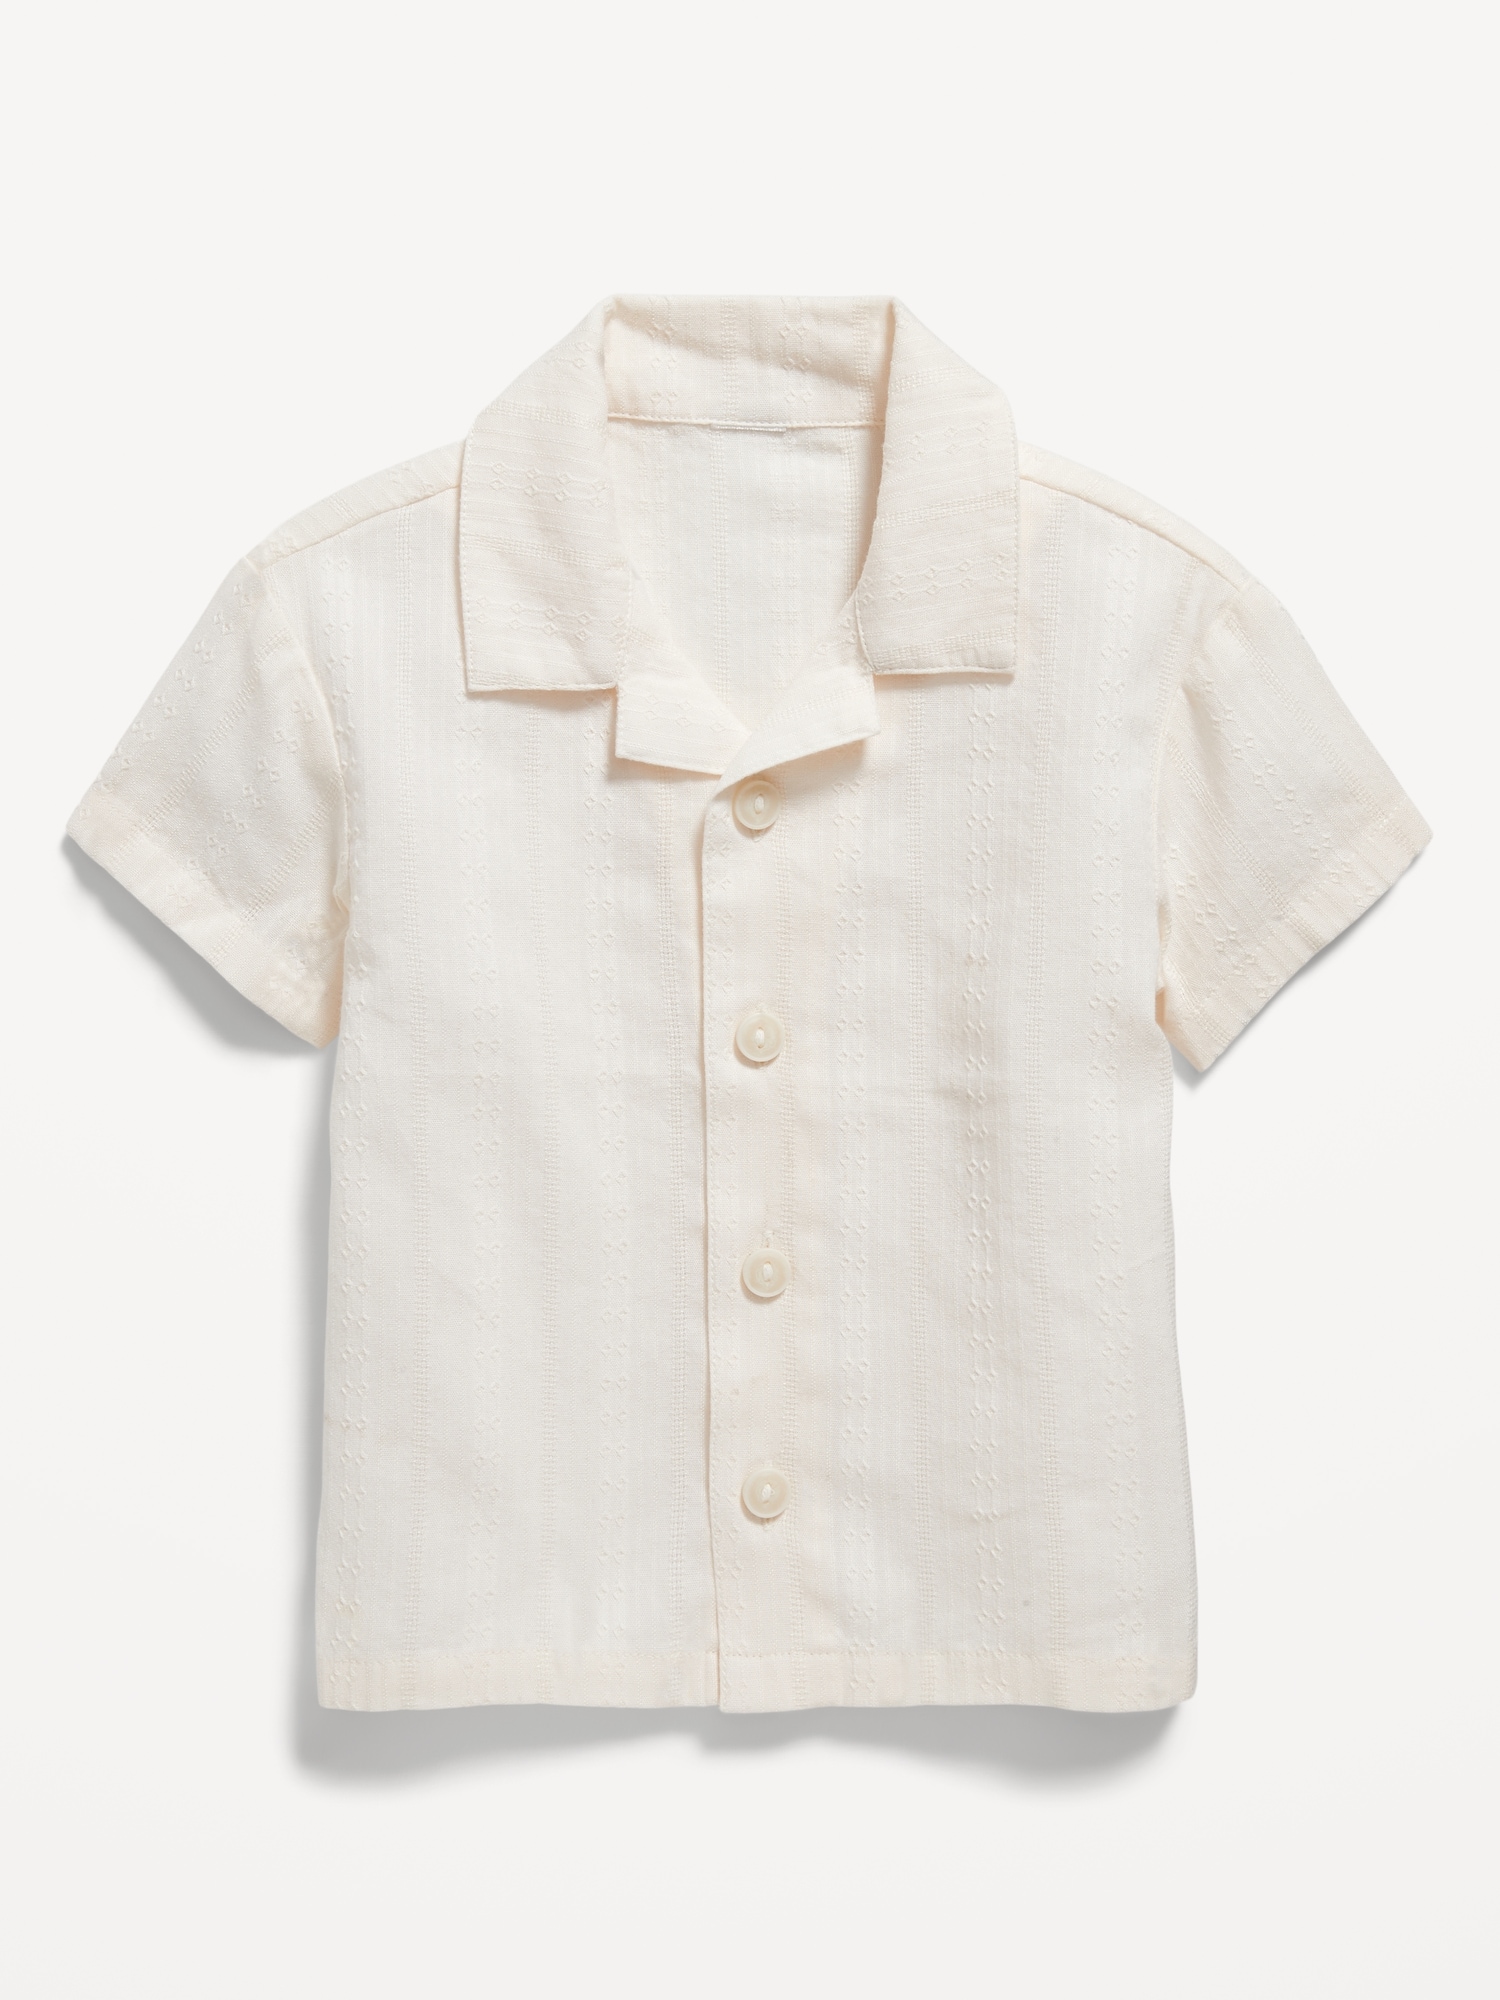 Textured Dobby Camp Shirt for Baby Hot Deal